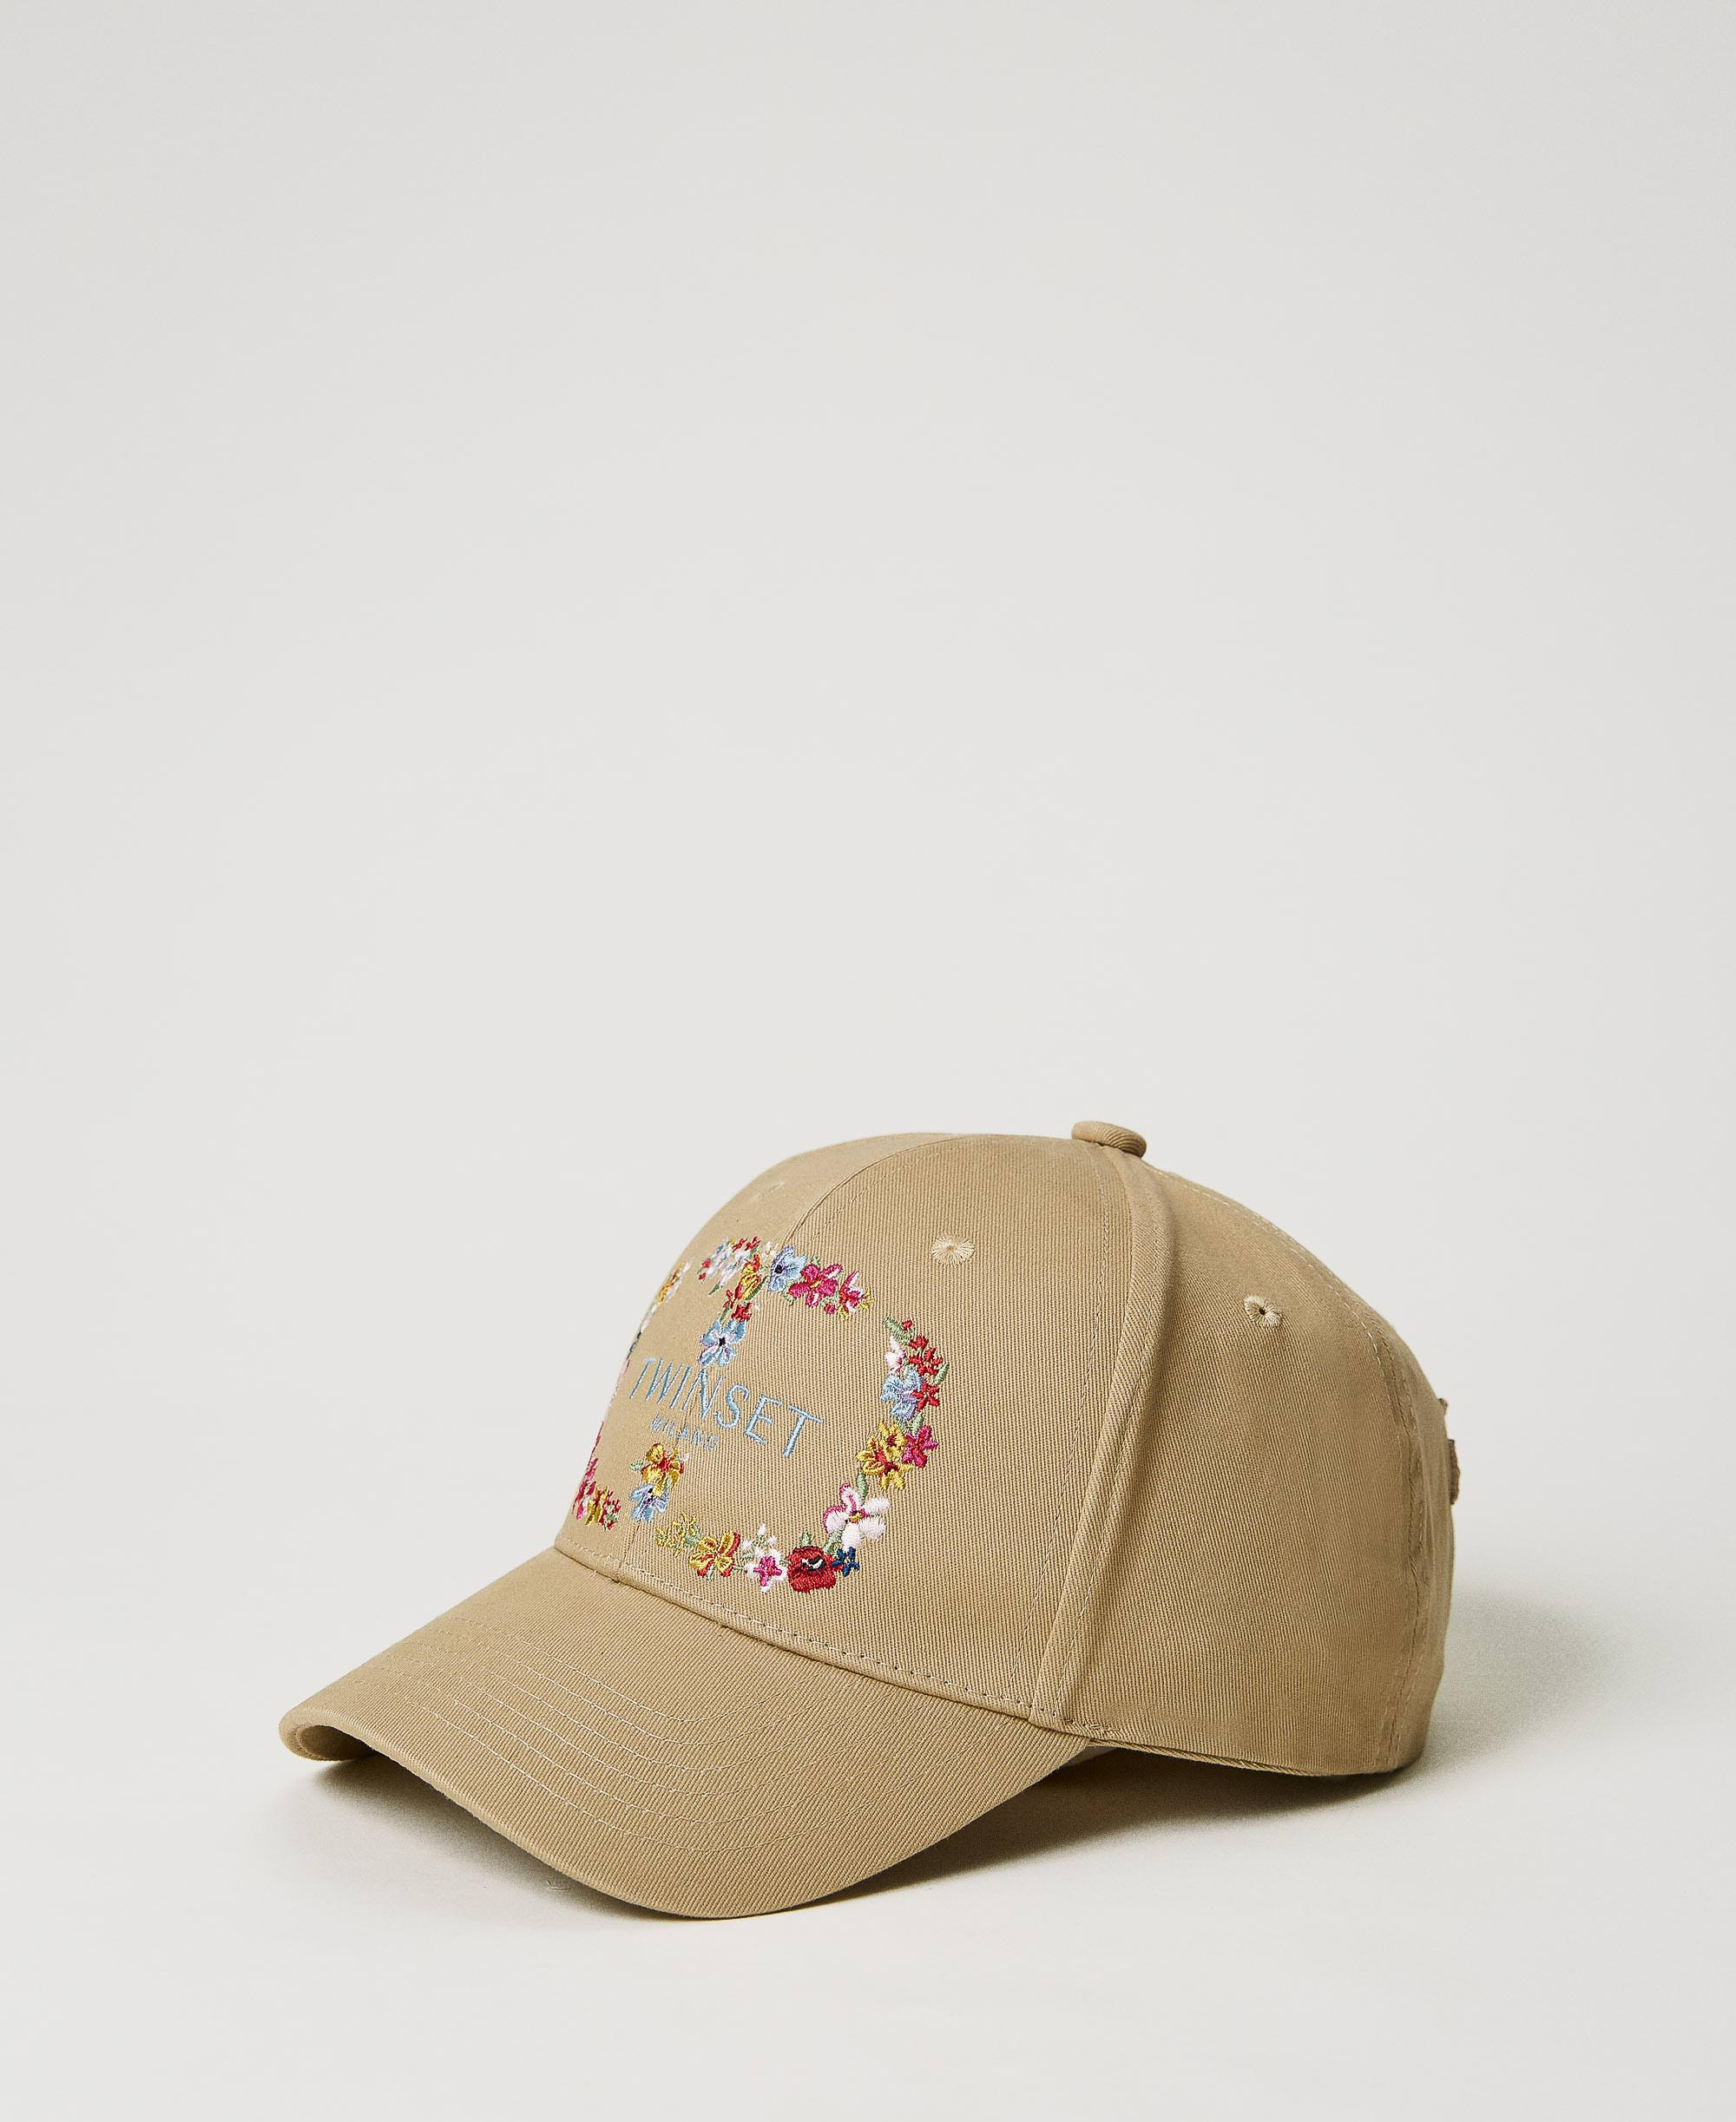 Baseball cap with floral Oval T